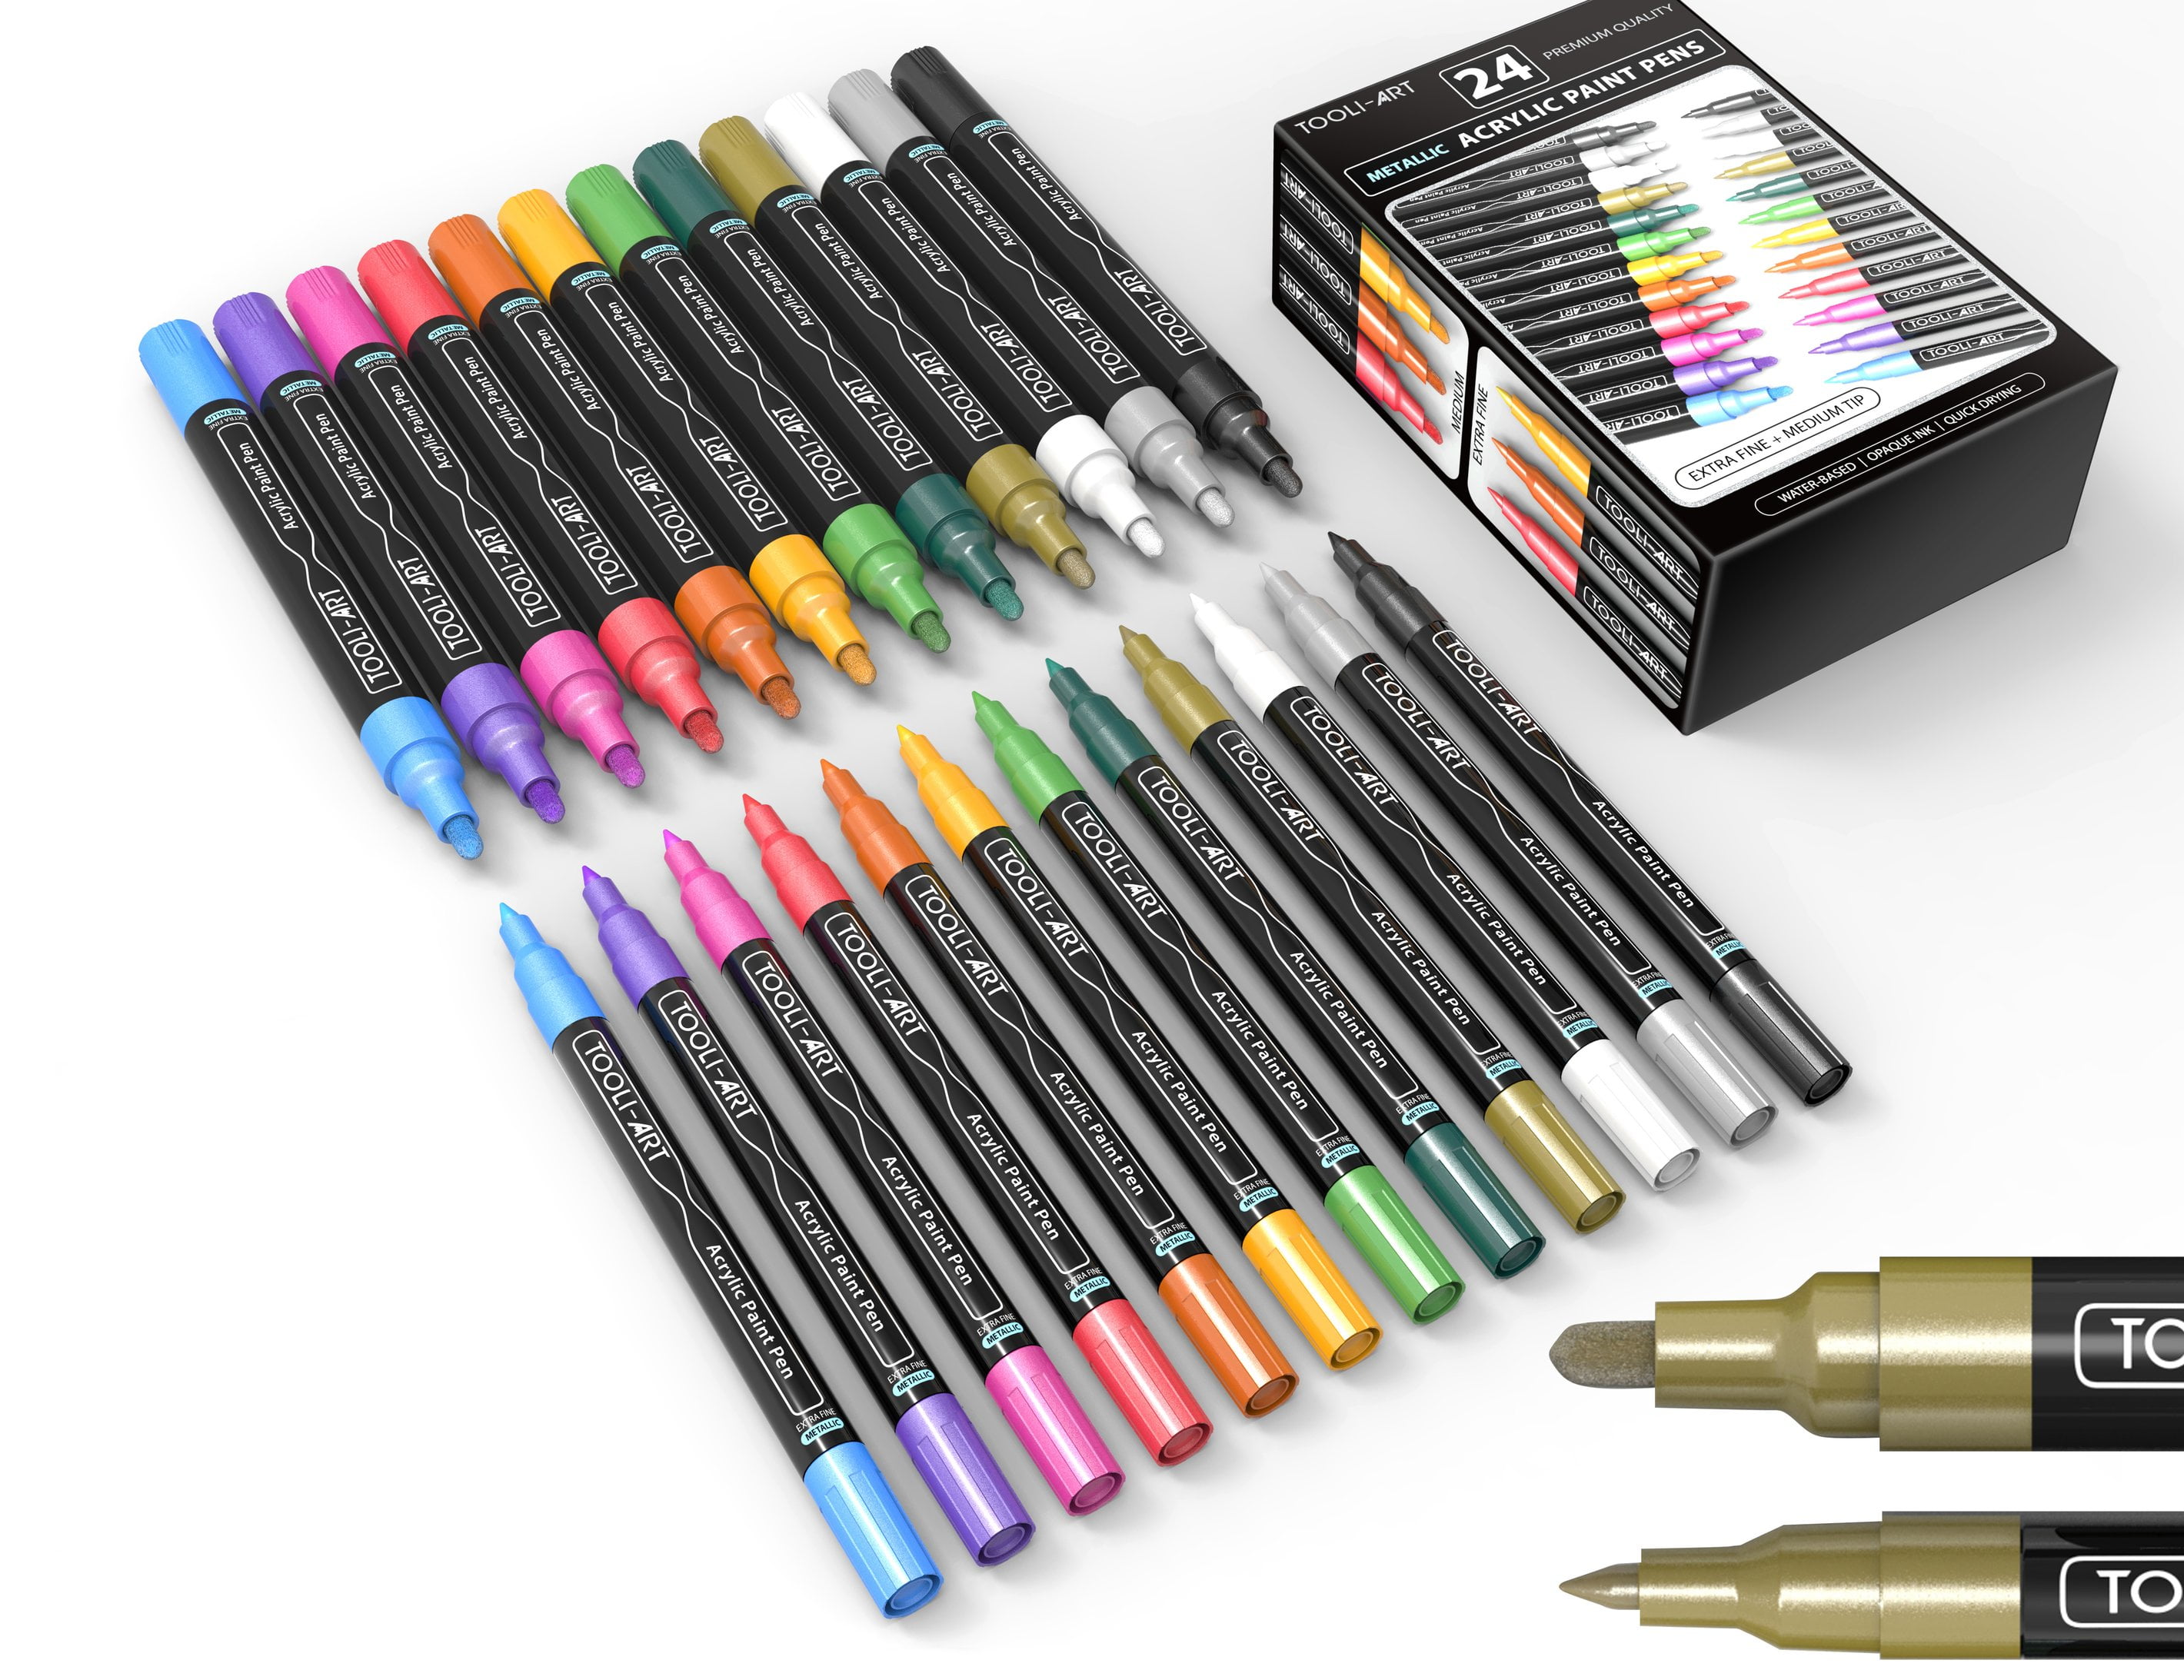 TOOLI-ART Acrylic Paint Markers Paint Pens Special Colors Set Extra Fine  And Medium Tip Combo For Rock Painting, Canvas, Fabric, Glass, Mugs, Wood,  Ceramics, Plastic, Multi-Surface. Non Toxic, (NEON) : Arts, Crafts & Sewing  